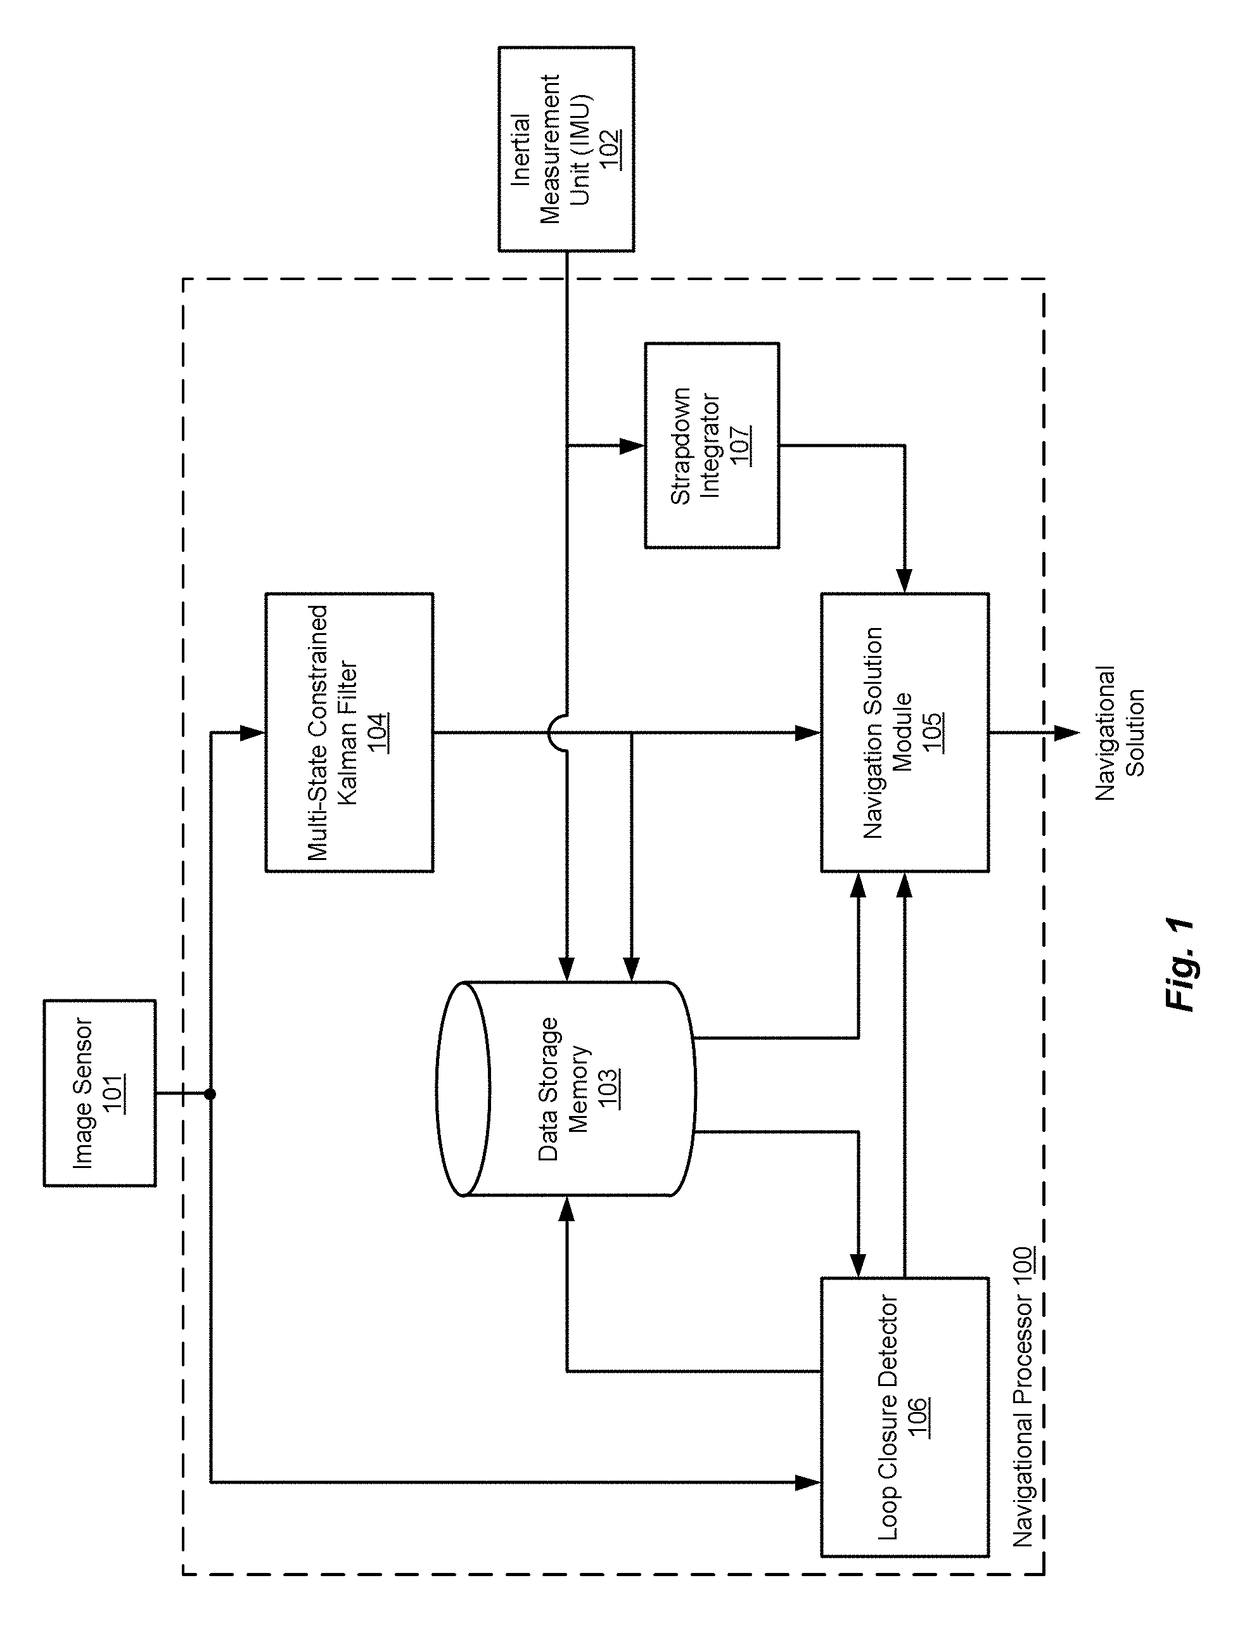 Vision-Aided Inertial Navigation with Loop Closure